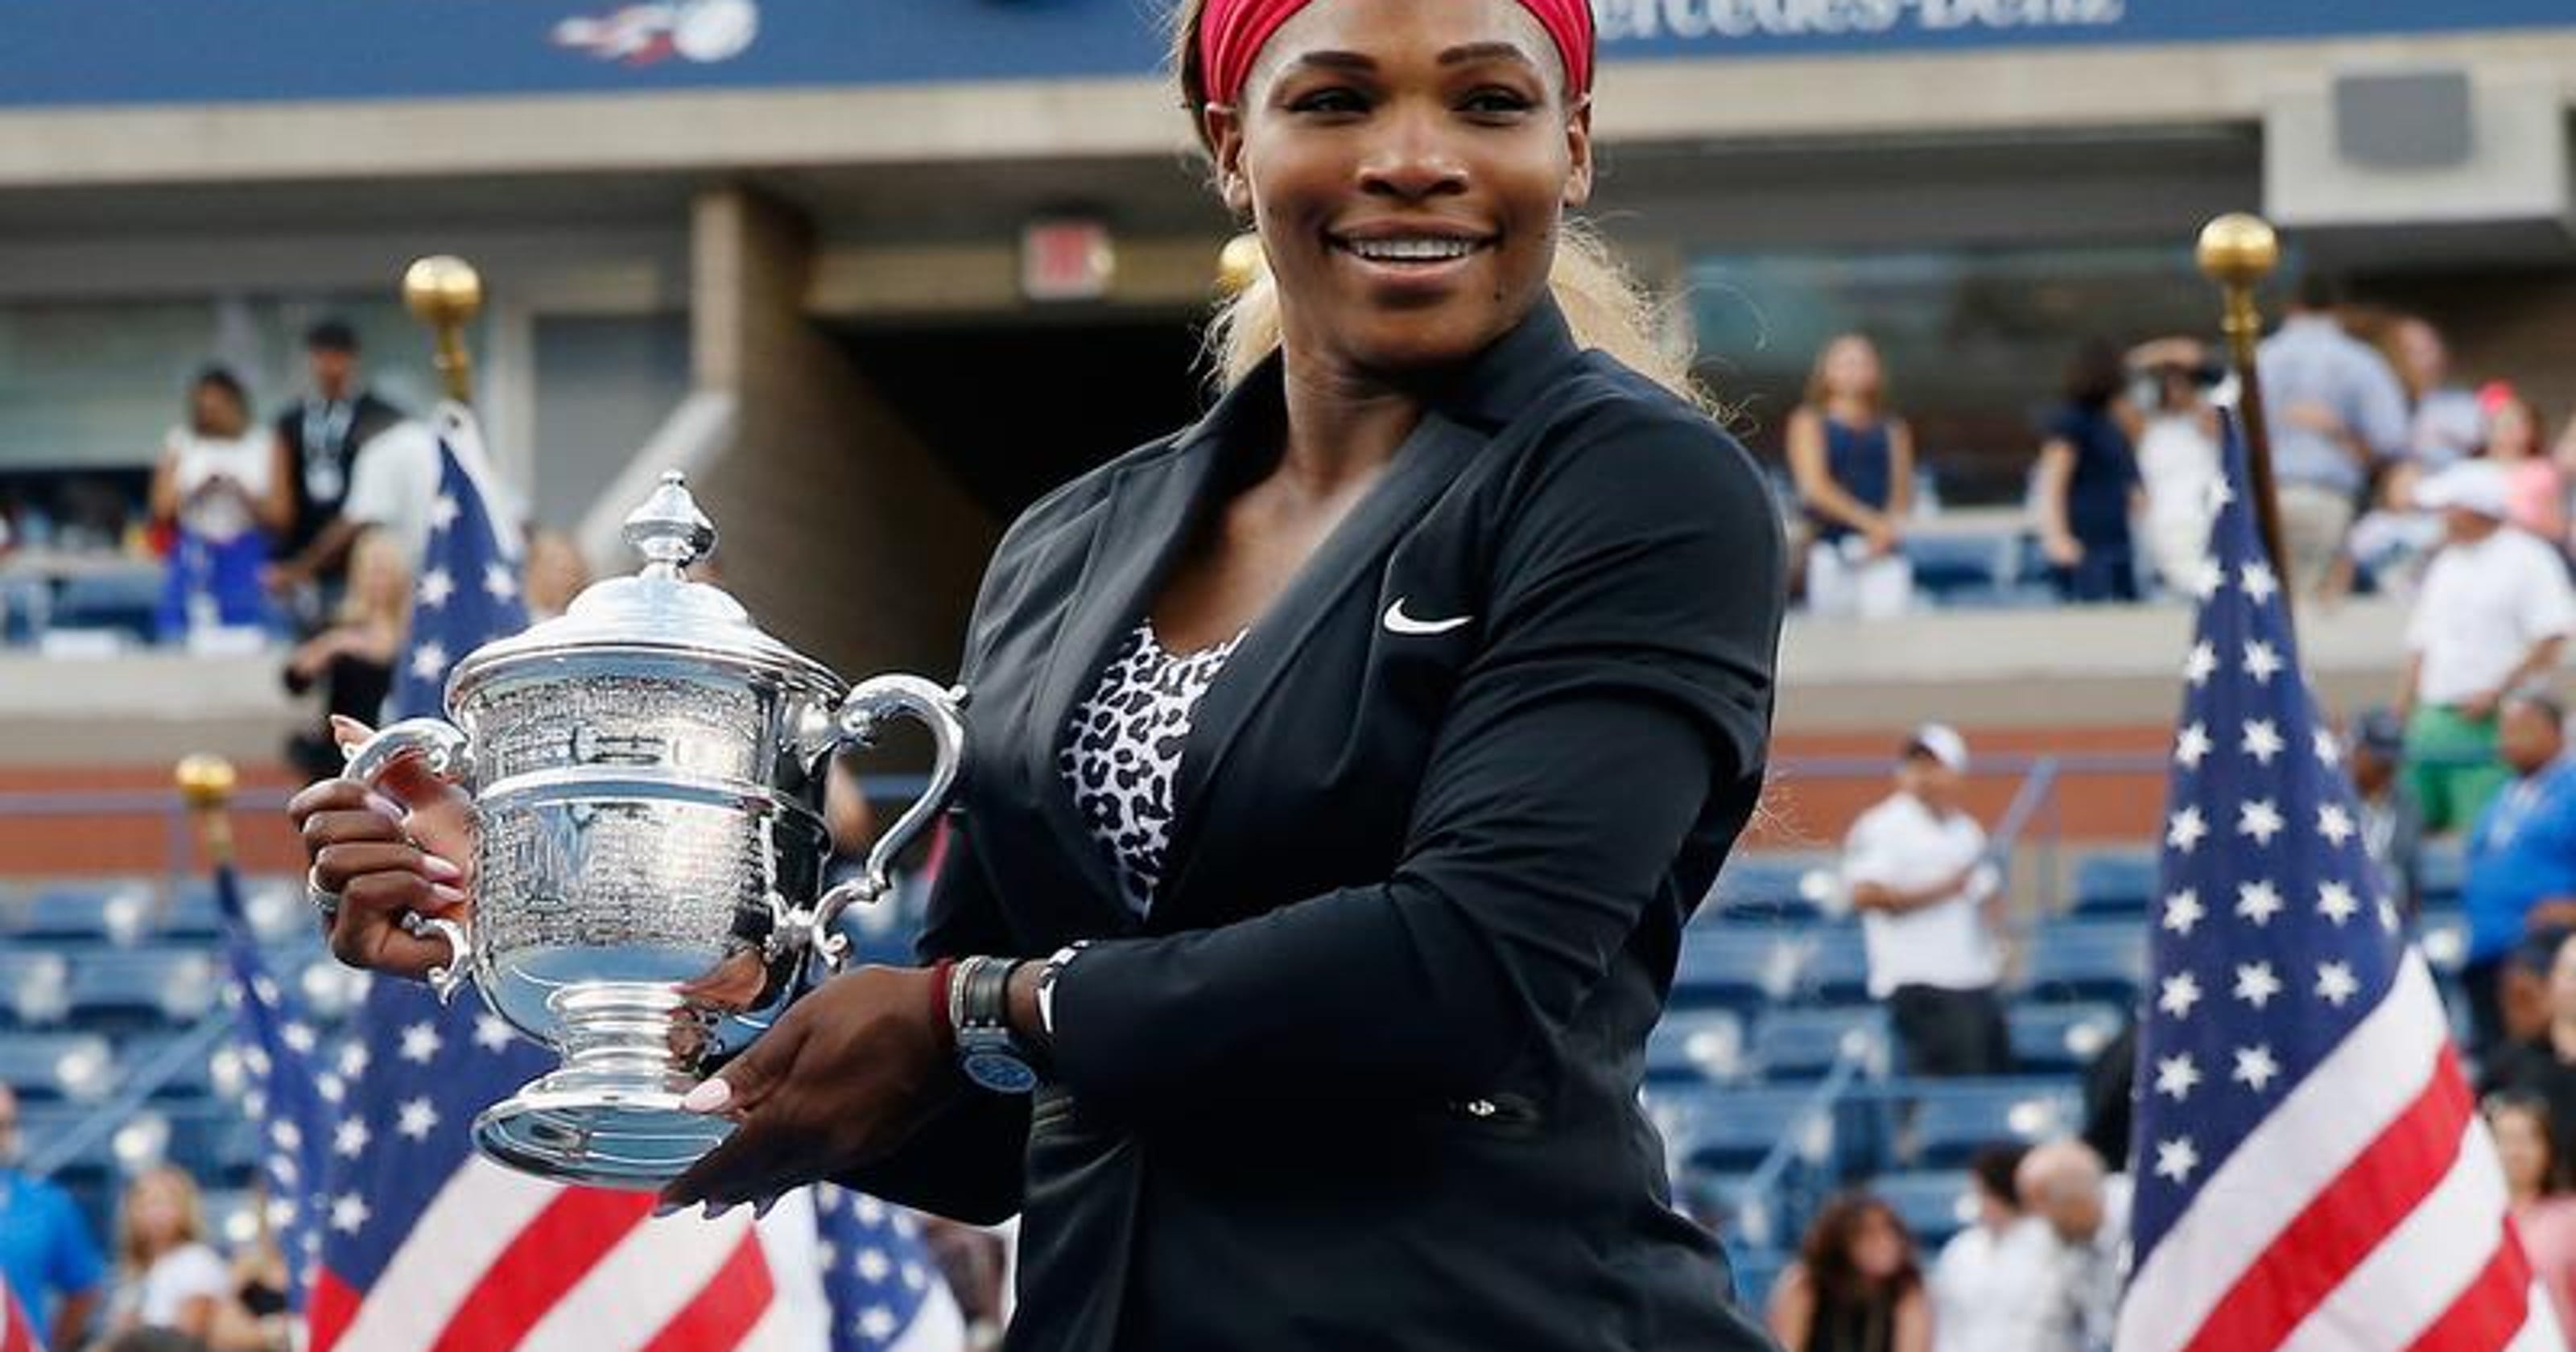 most-grand-slam-titles-in-women-s-tennis-history